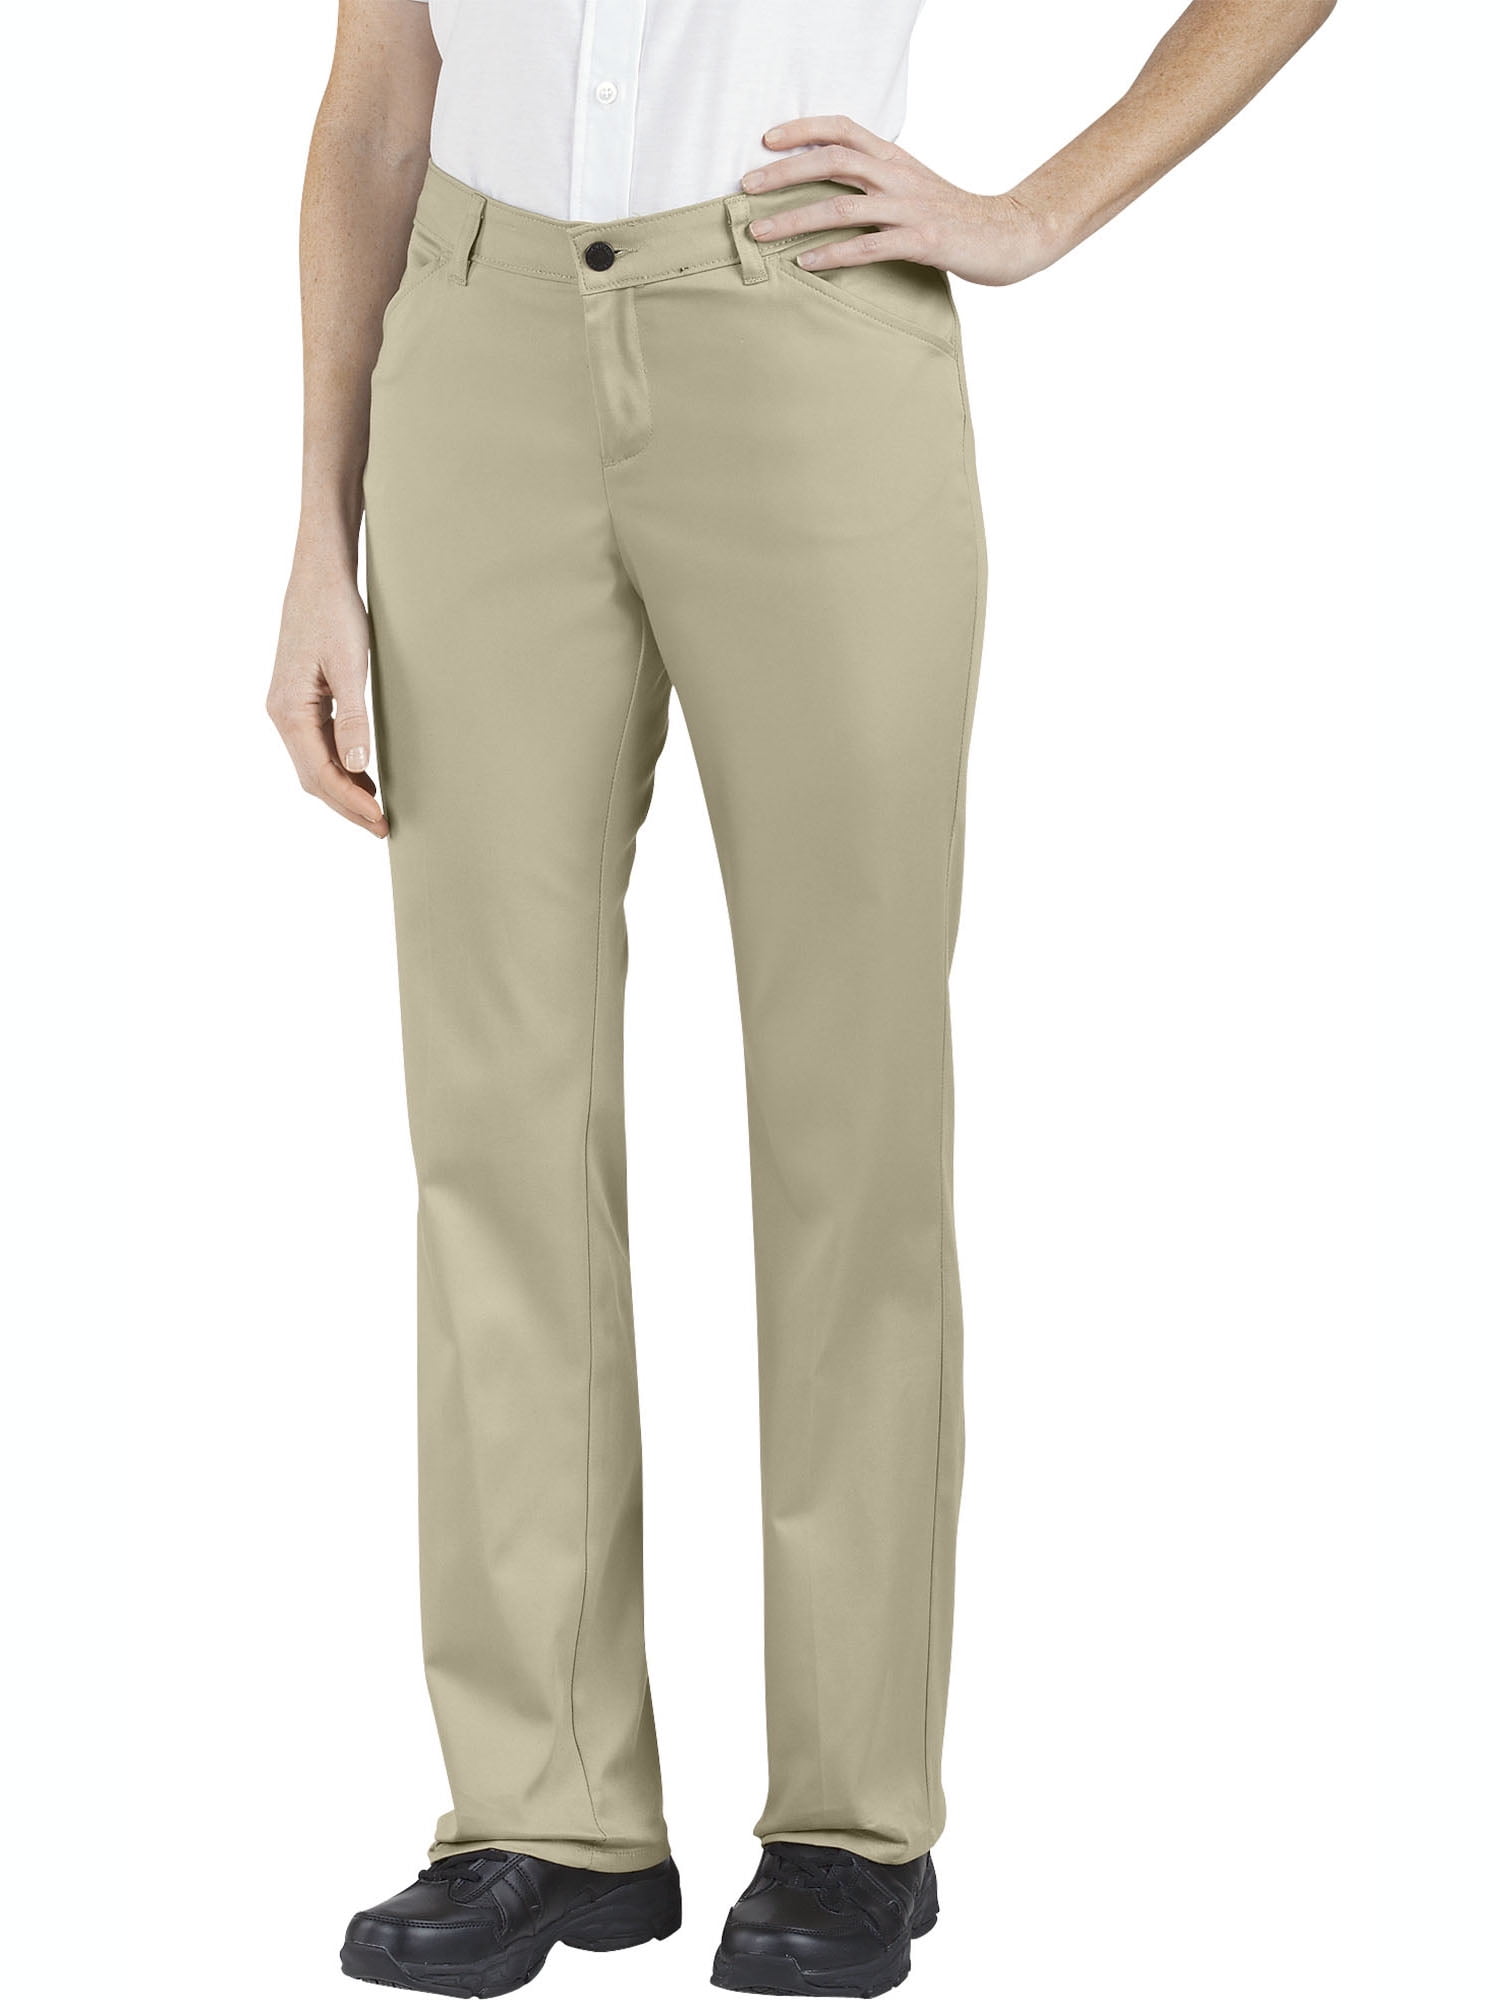 womens twill pants | Nordstrom